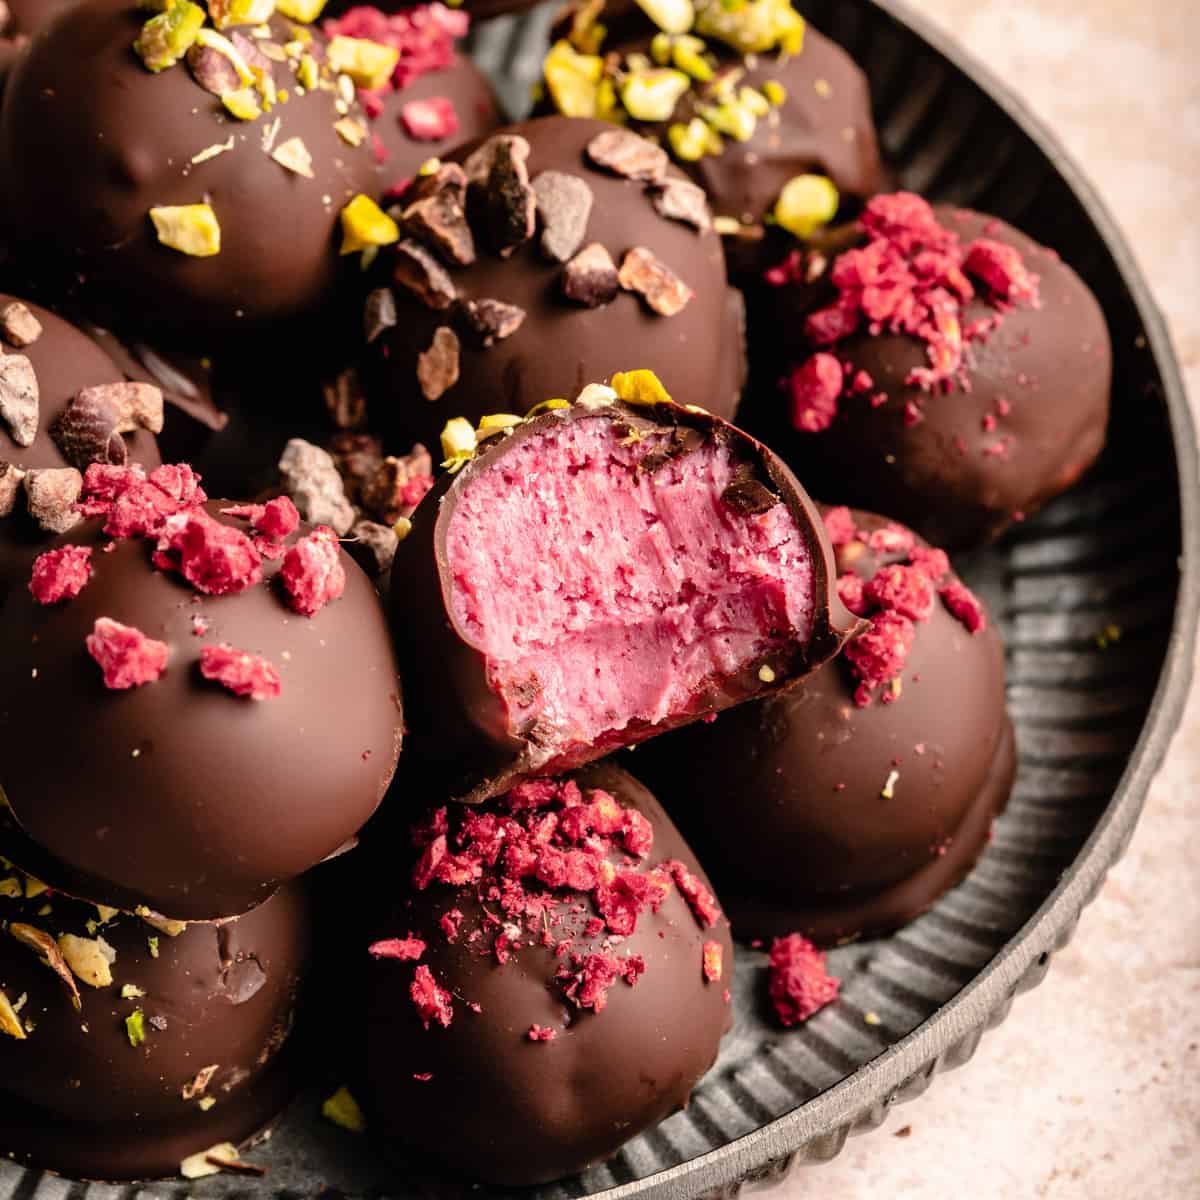 A plate of raspberry truffles with one on top with a bite taken out showing the pink center.